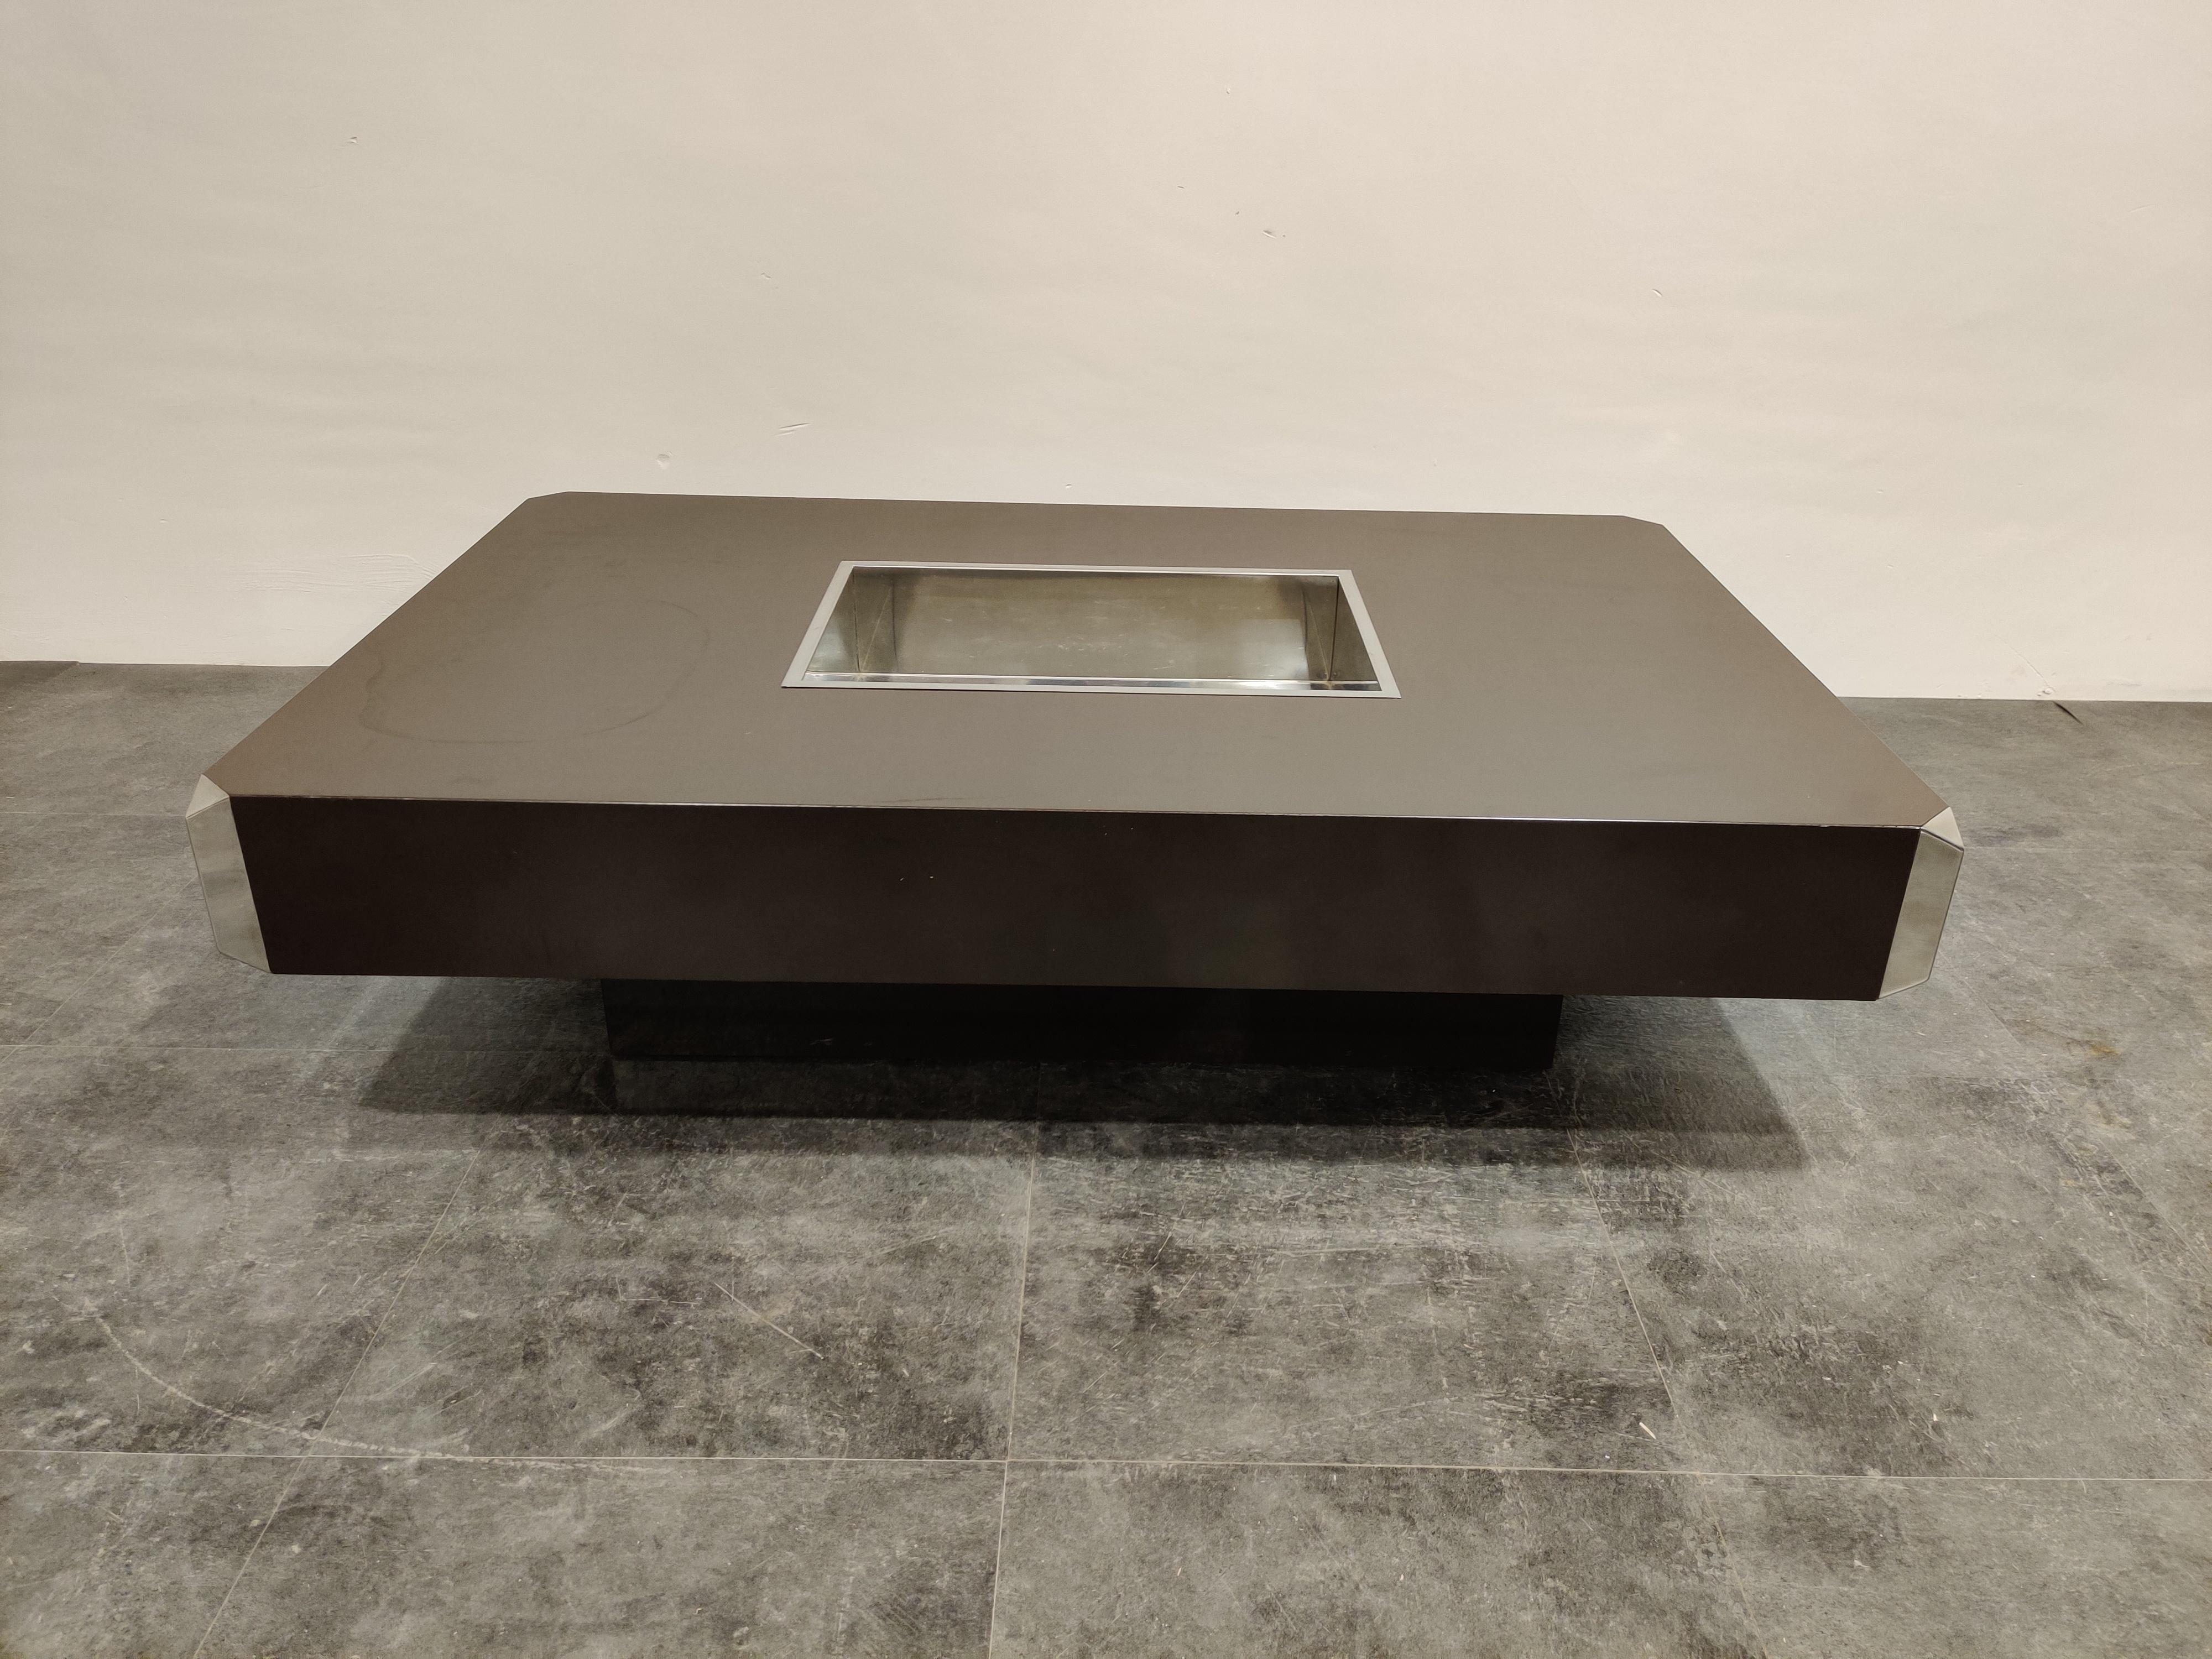 Luxurious bar coffee table made from brown lacquered wood designed by Willy Rizzo for Mario Sabot.

The table is in good condition with very minor user traces.

This table fits well in today's interiors thanks to its luxurious and timeless